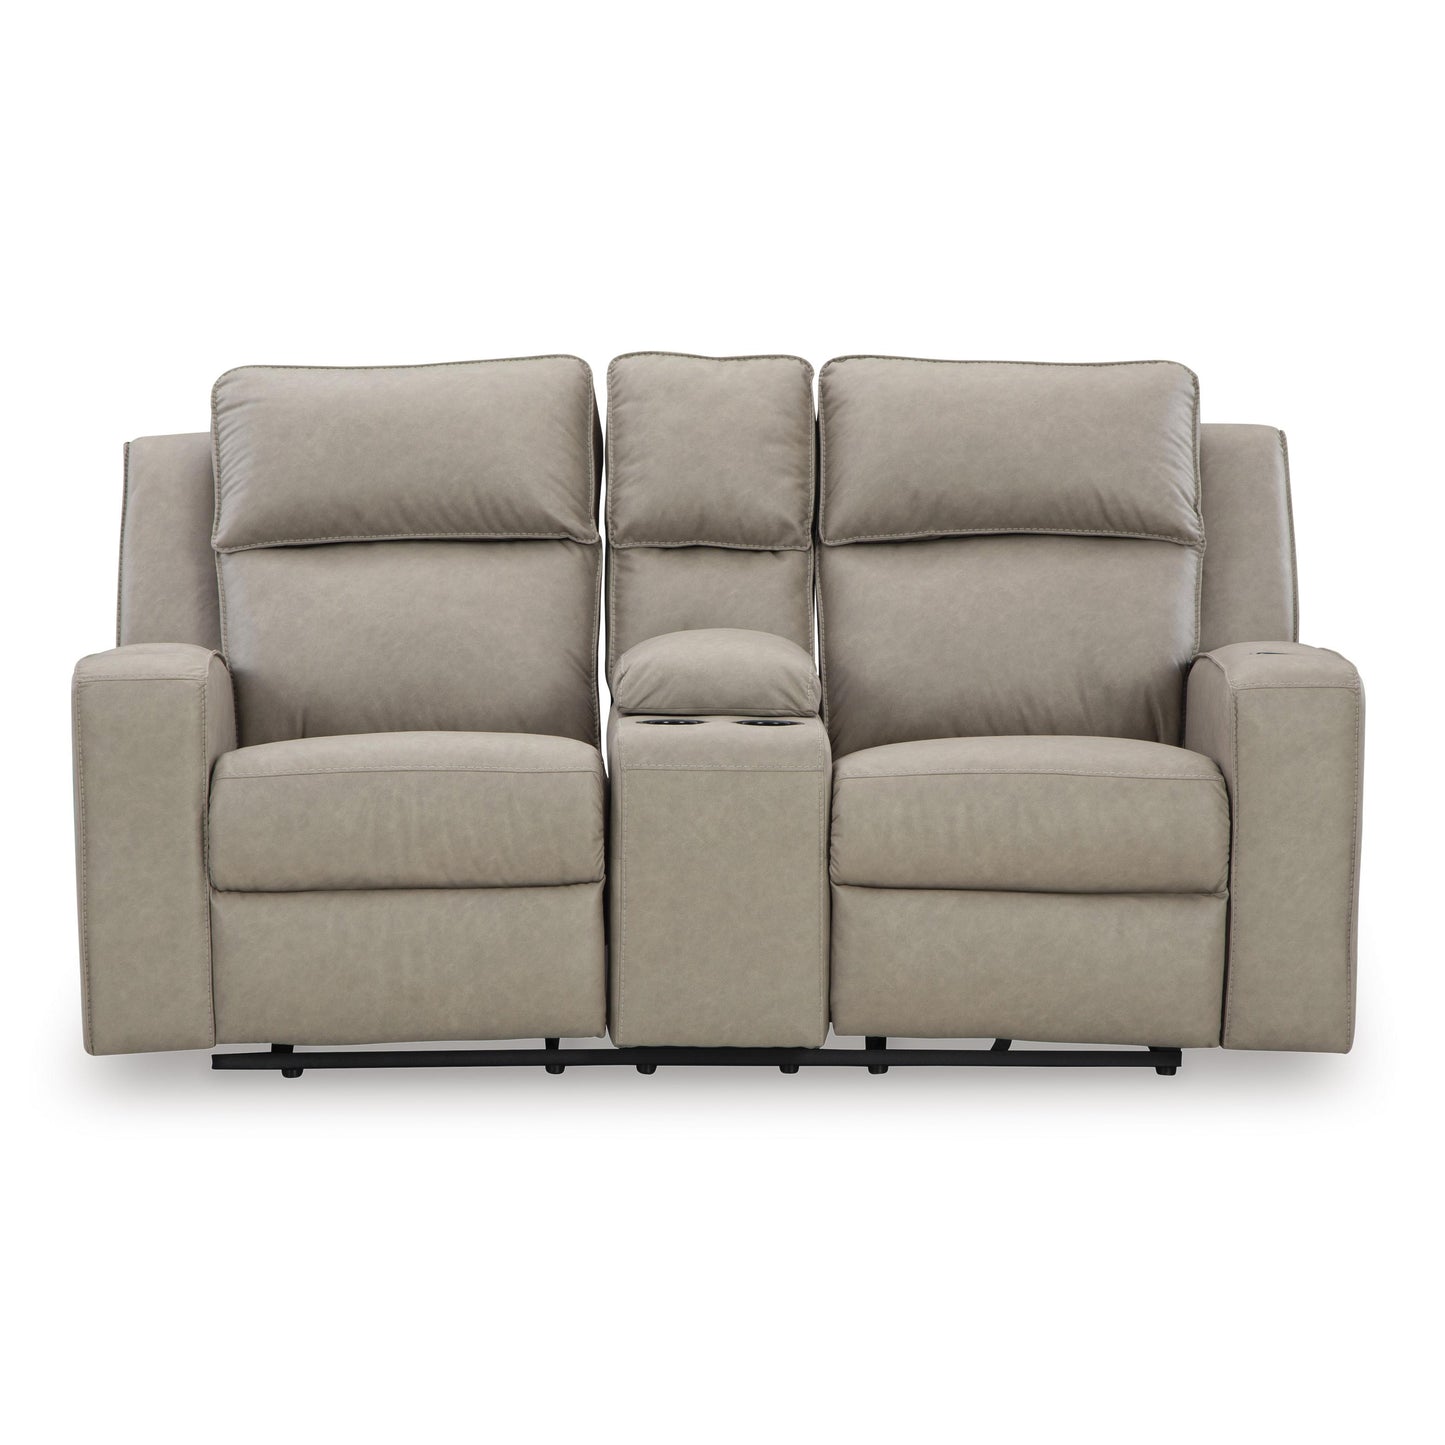 Signature Design by Ashley Lavenhorne Reclining Leather Look Loveseat 6330794 IMAGE 3